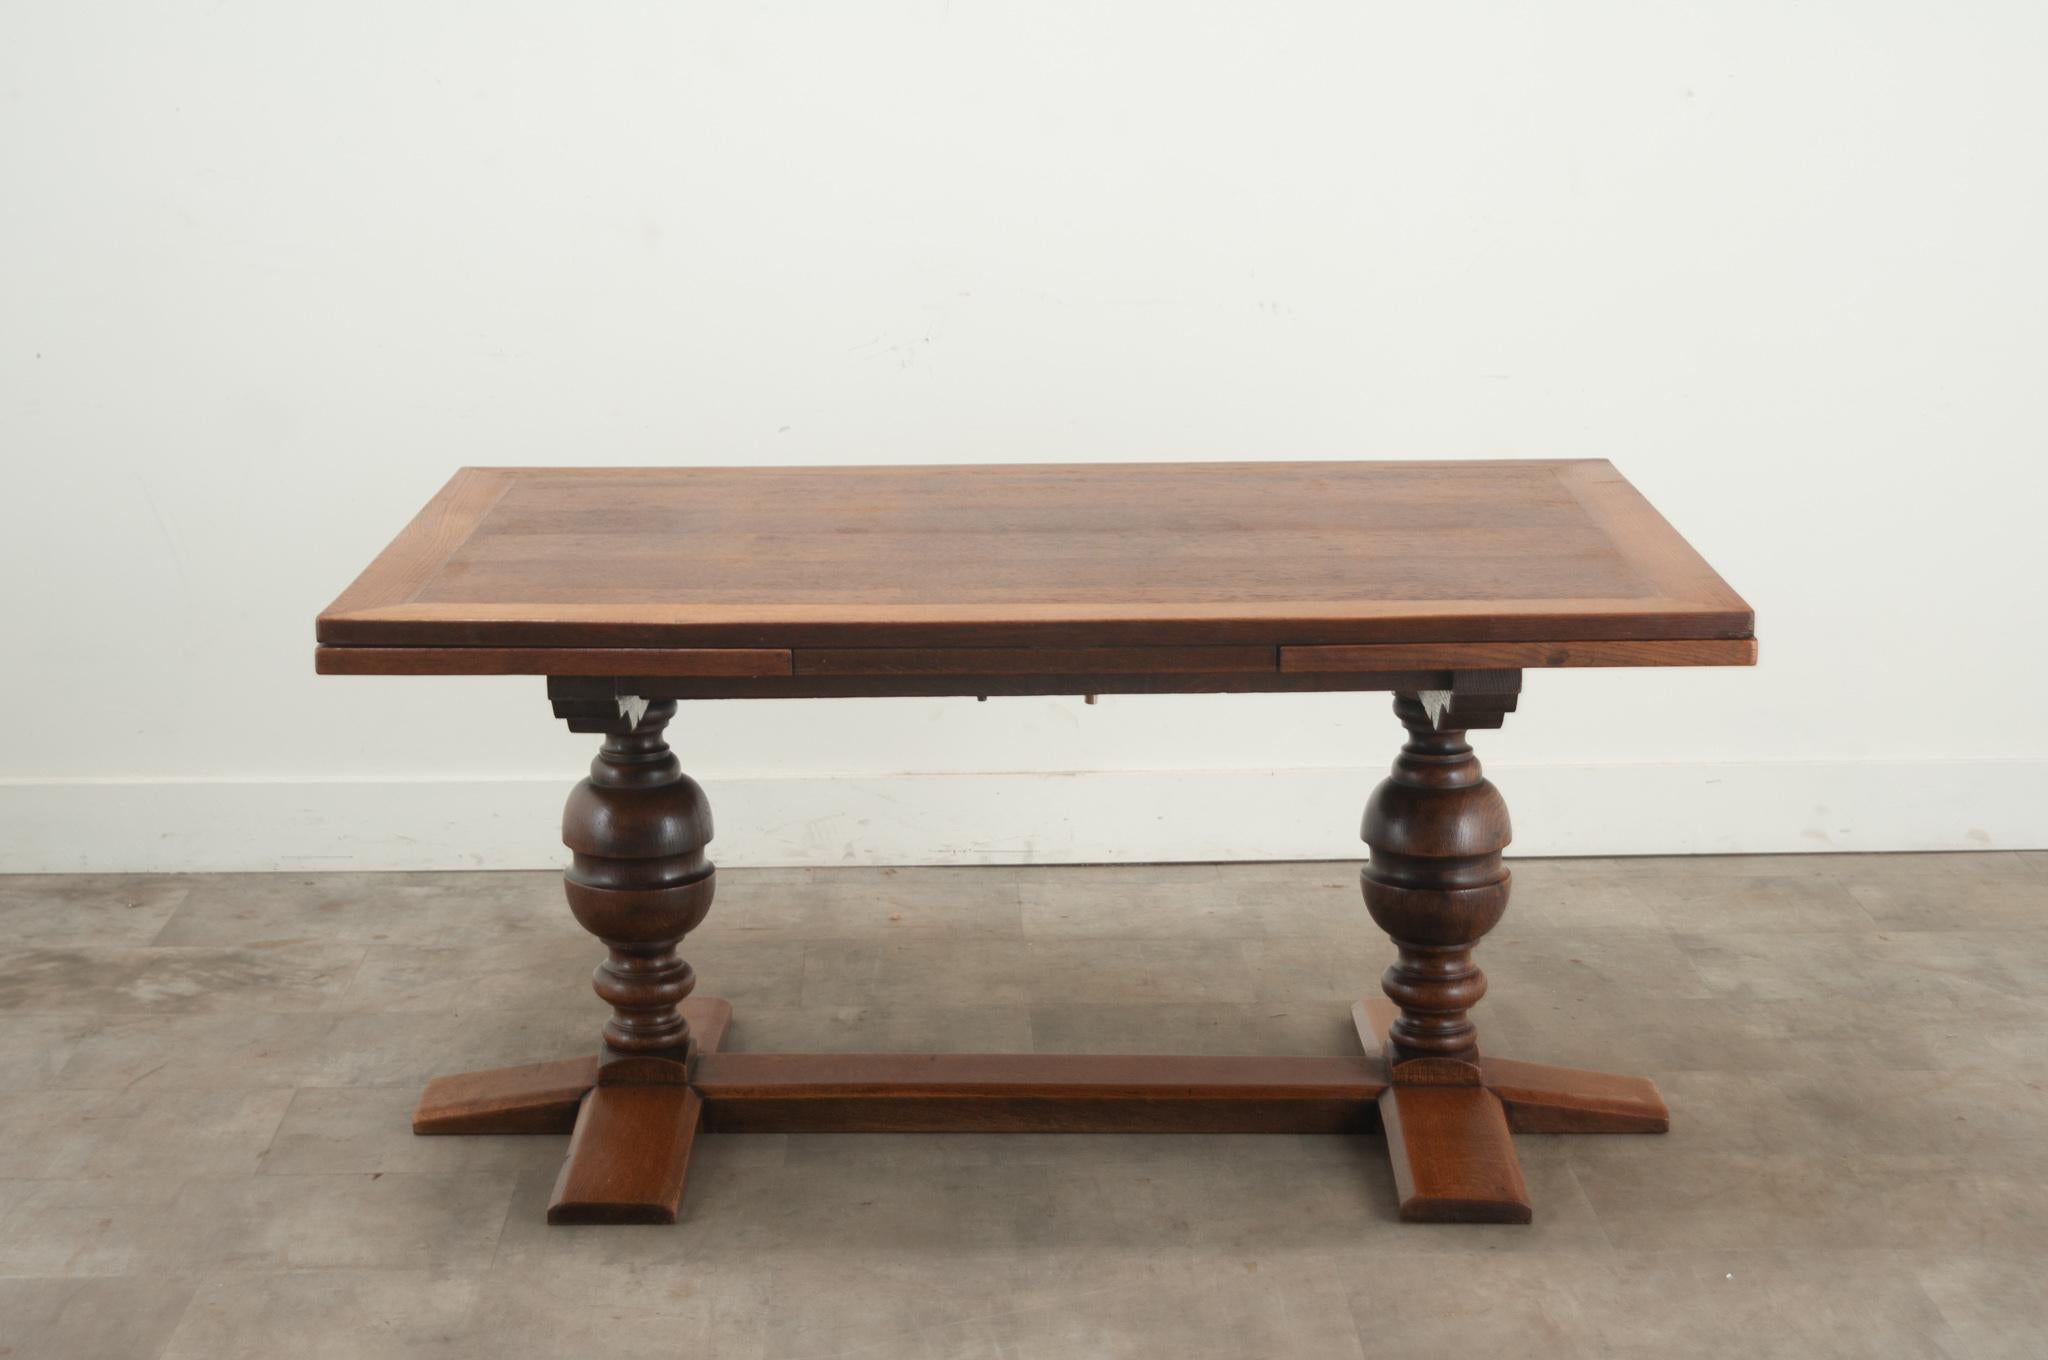 An extending French oak trestle base dining table with two self storing leaves. This versatile table top rests over a trestle base composed of two turned baluster legs joined by a wide stretcher and base. This table has recently been cleaned and